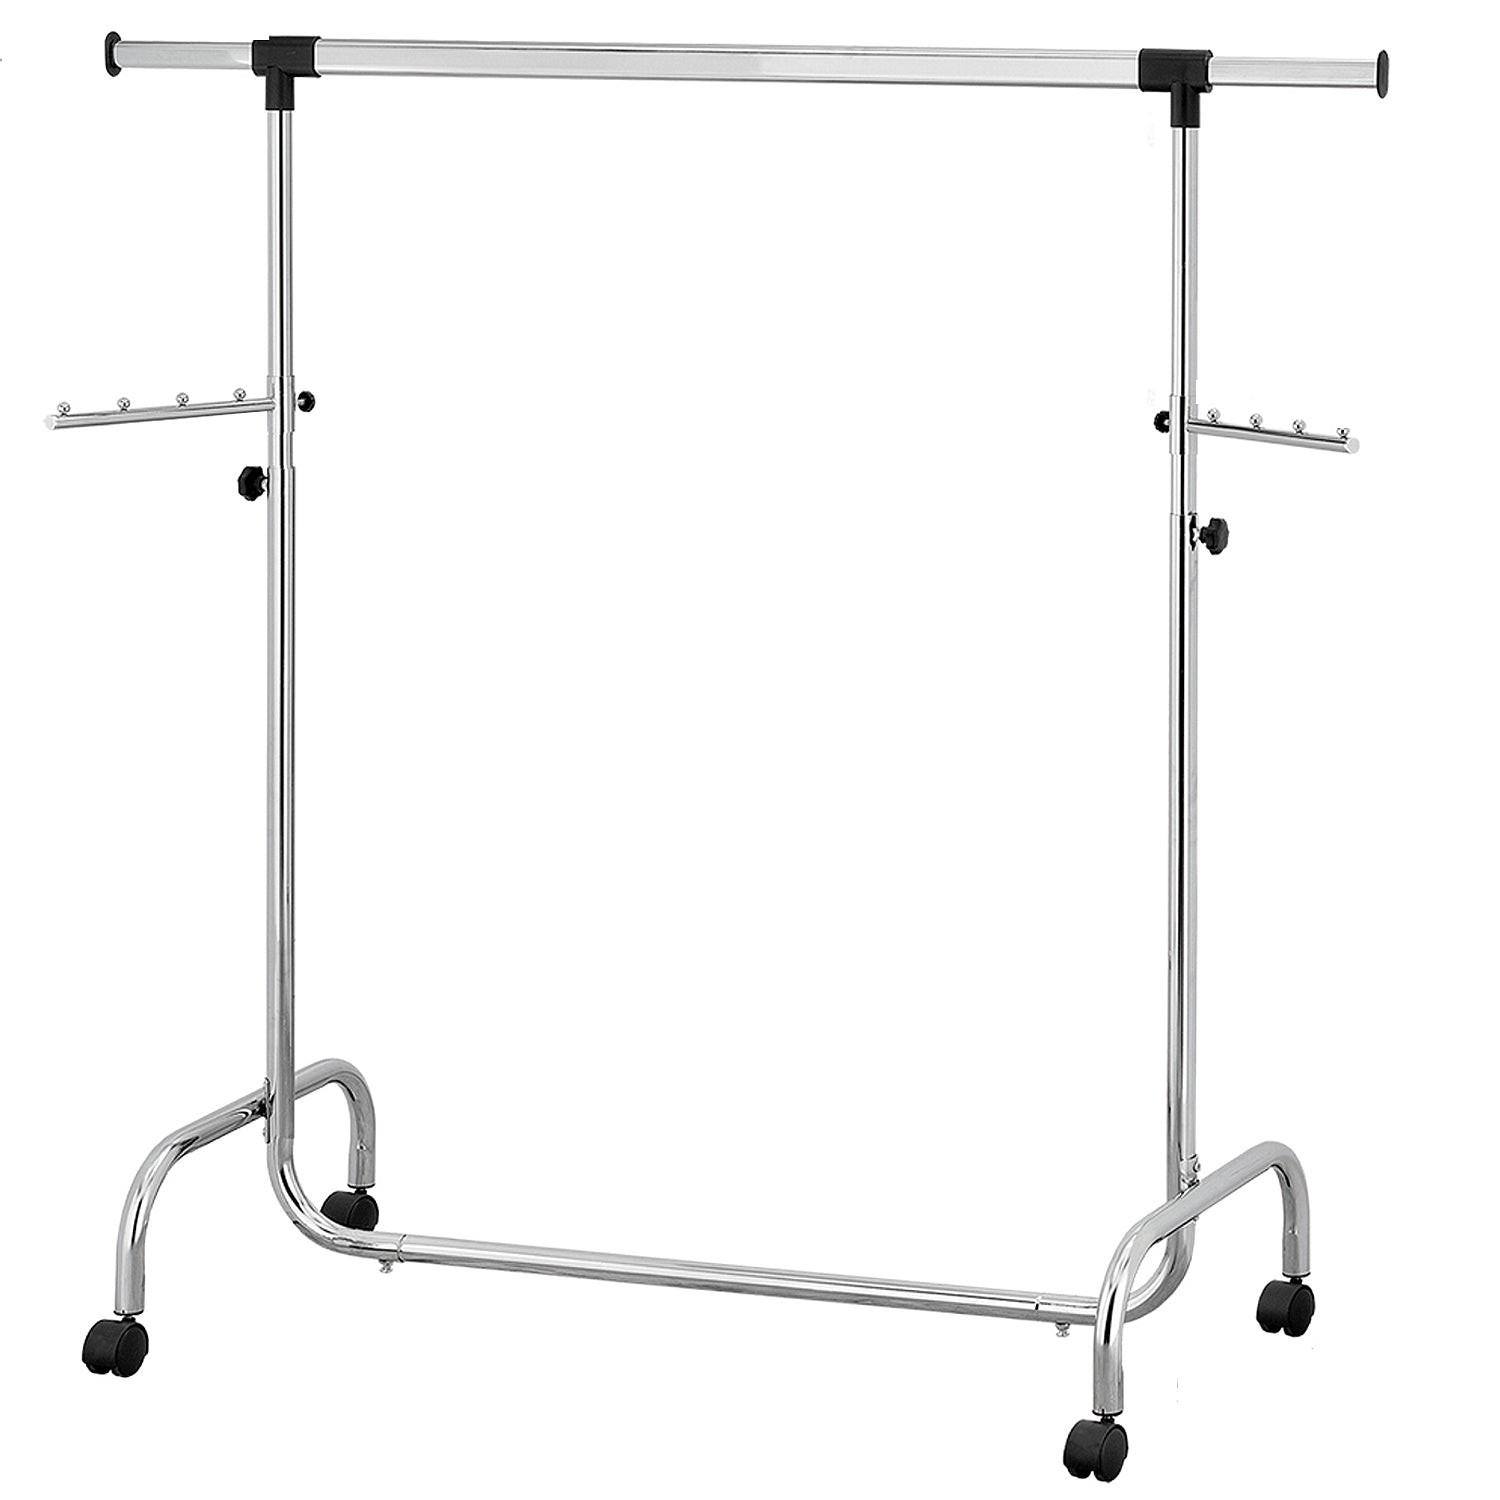 Tatkraft Falcon - Sturdy and Big Clothes Rack on Wheels, Extendable Length and Height, Easy to Assemble